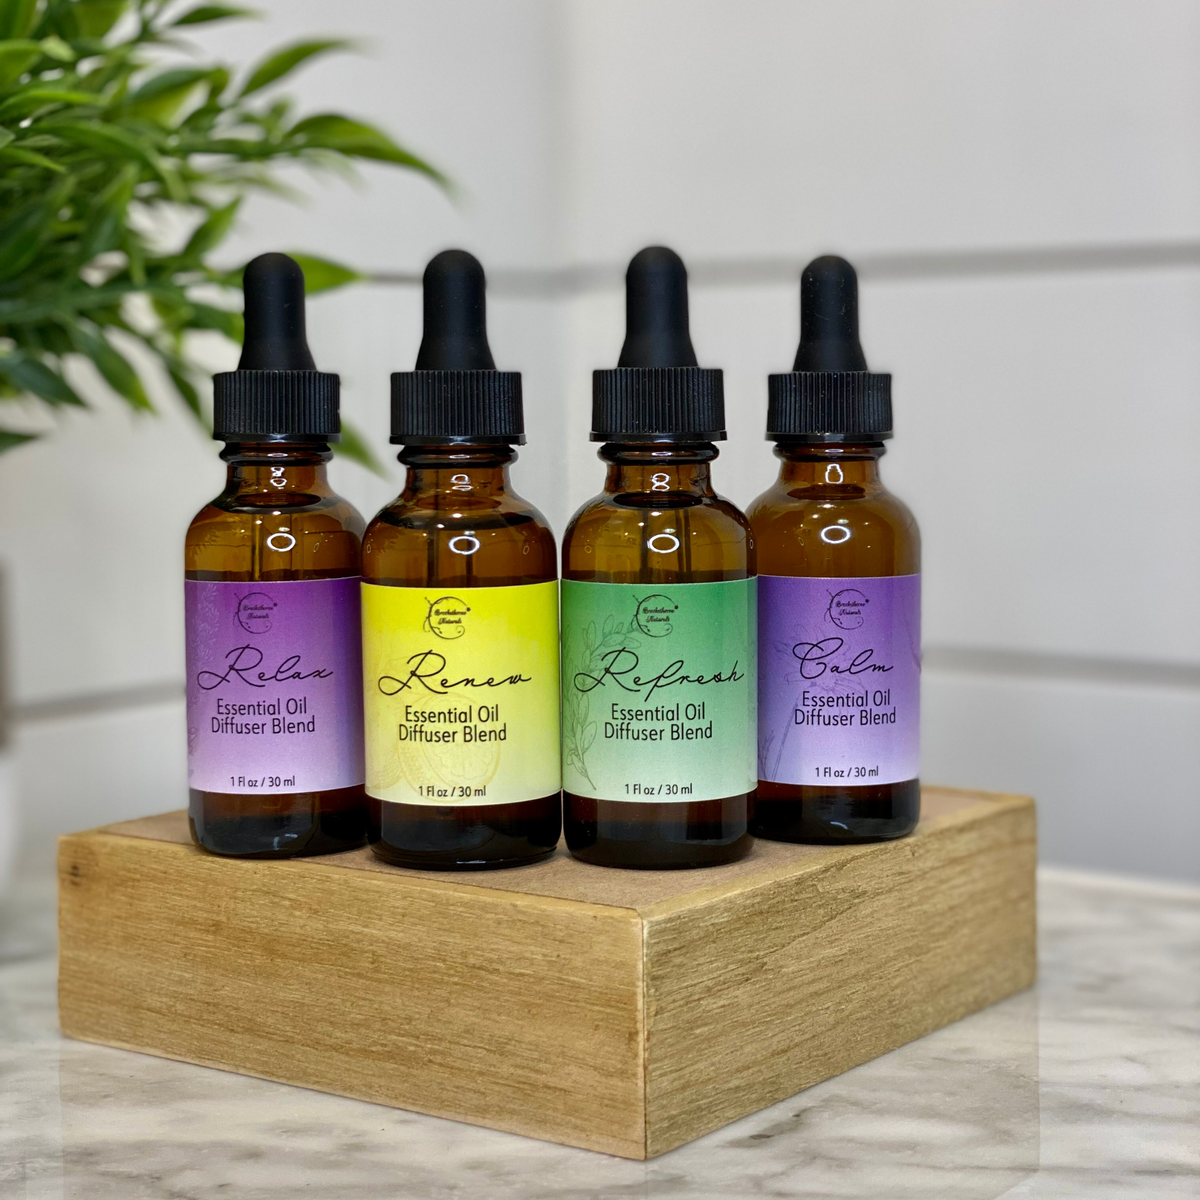 Relax, Renew, Refresh, and Calm Essential Oil Diffuser Blends sitting on a wooden block